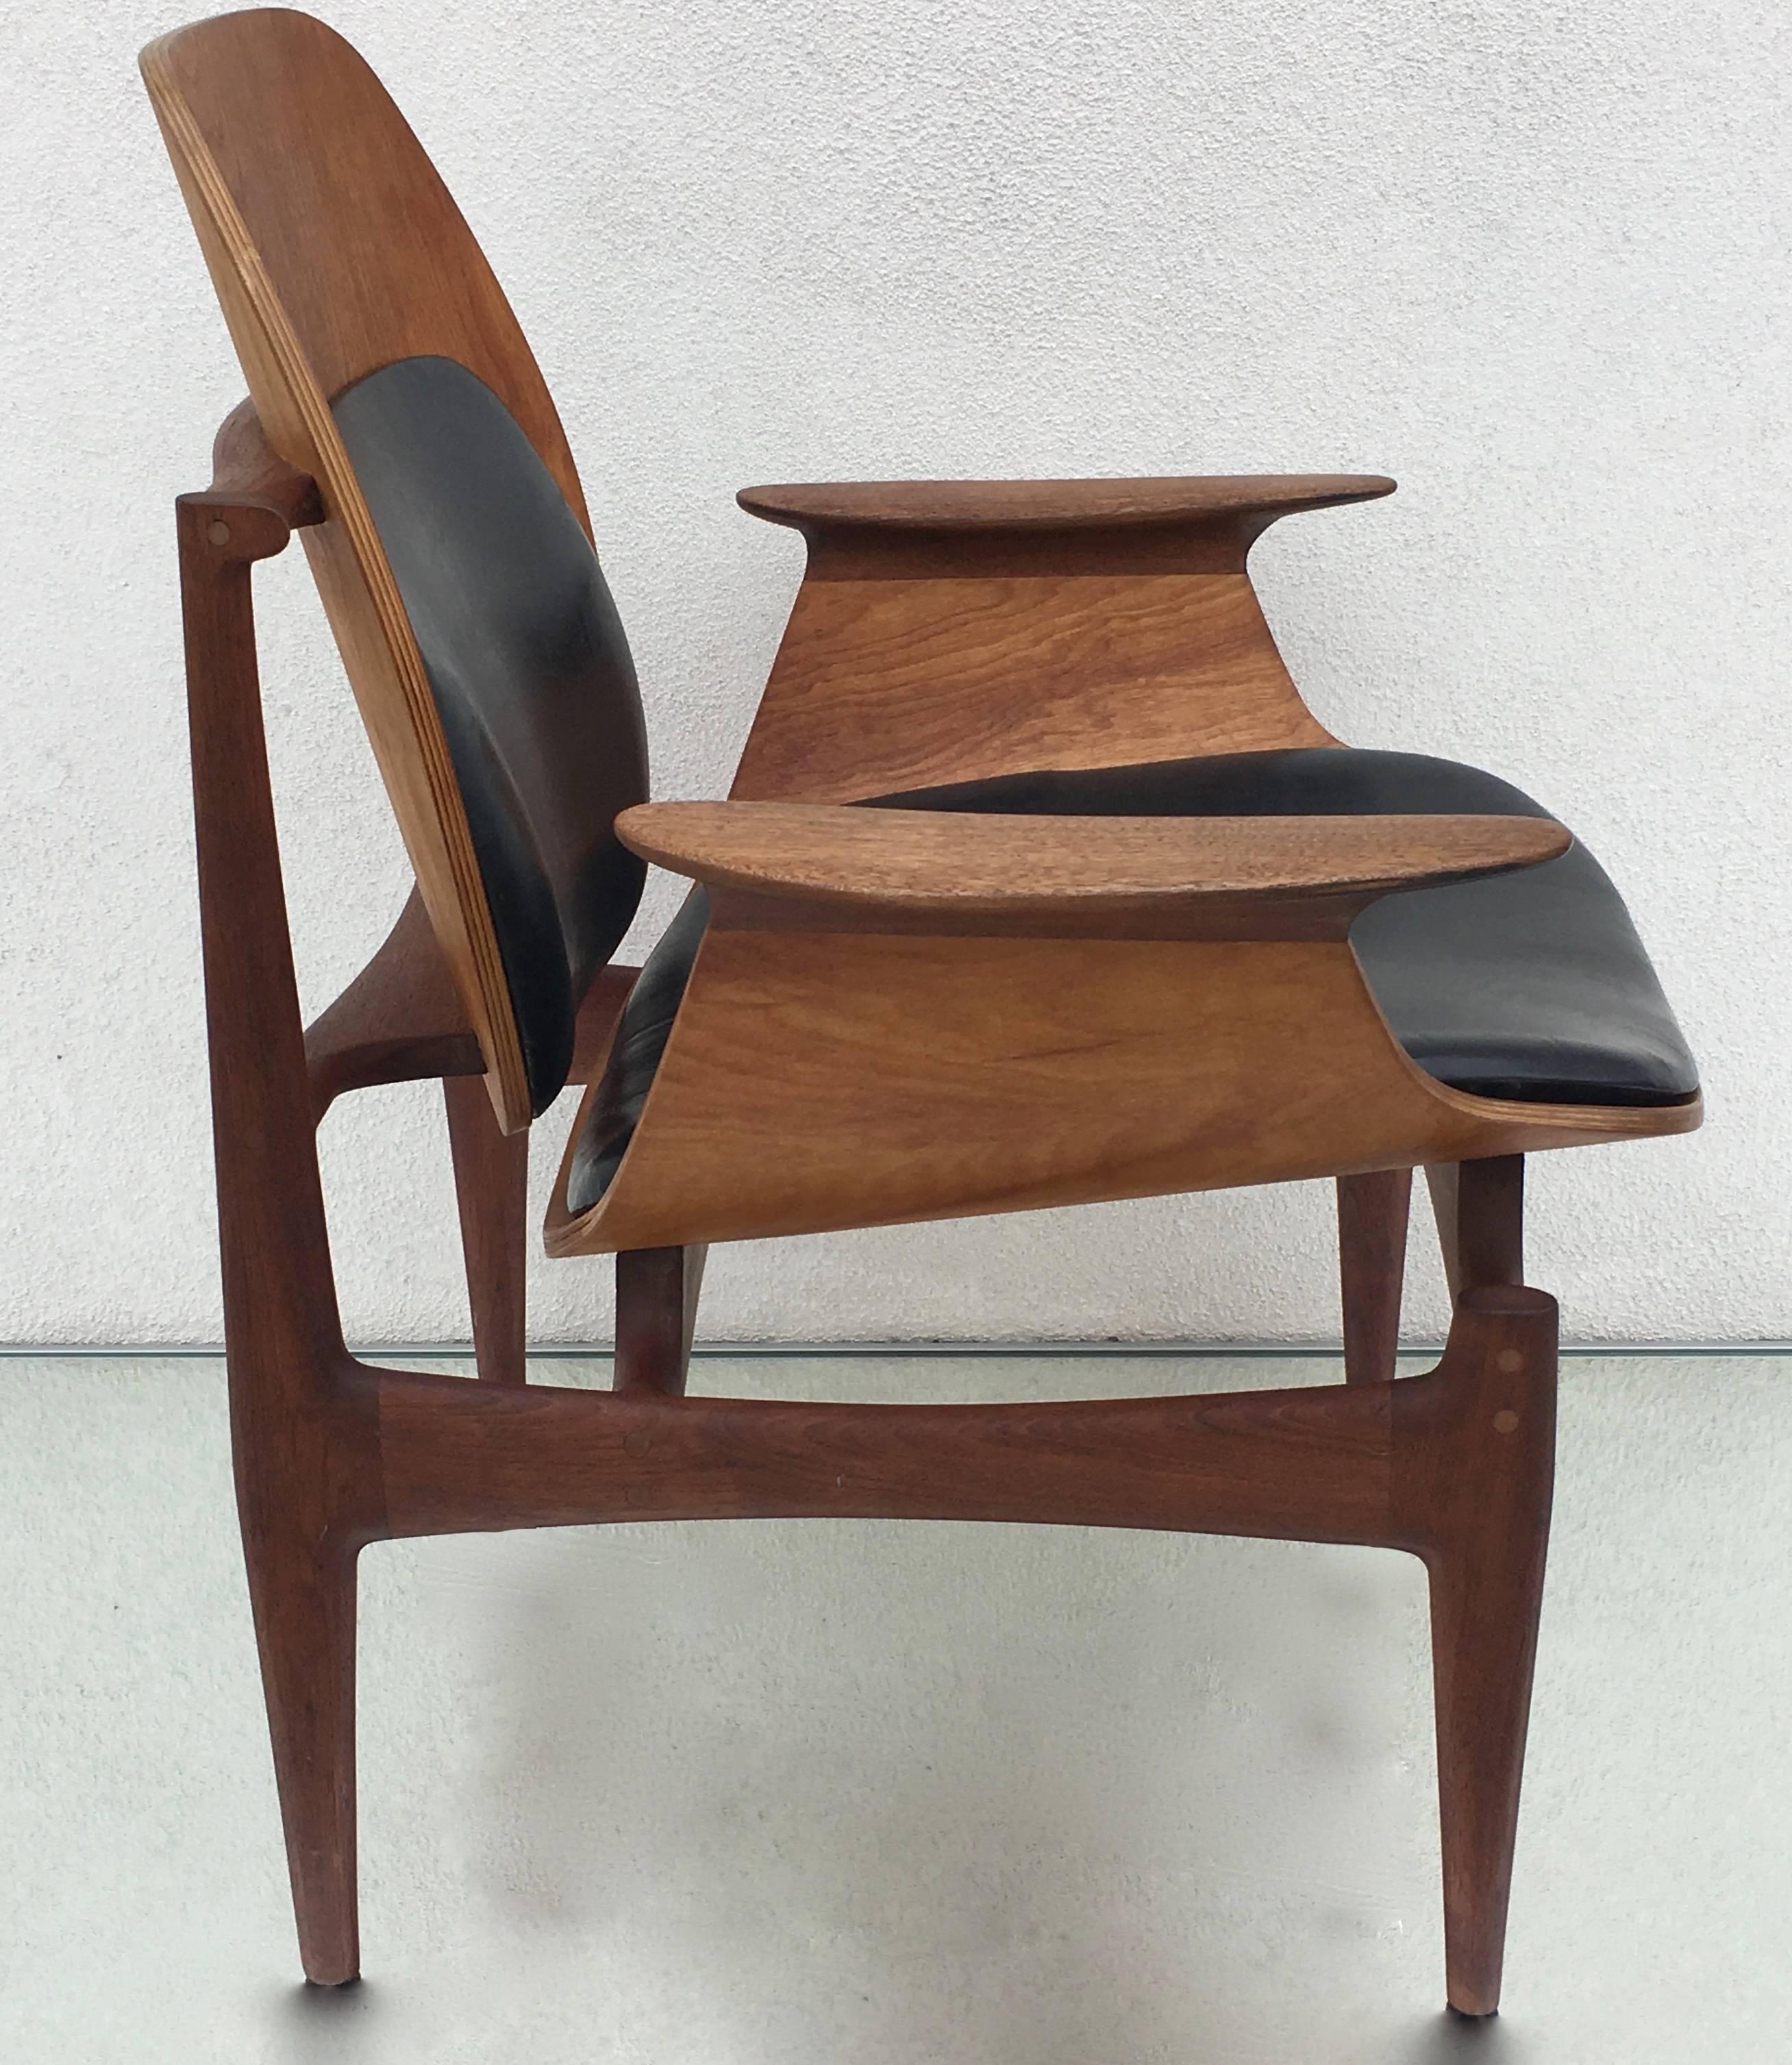 An exceptional one of 1/1 studio Craft, teakwood and plywood armchair.
Designed by John W. McWilliams (1924-2015), for his own house.
The joinery and craftsmanship are of the finest quality.
California, circa 1960s.
Chair Provenance: John W.